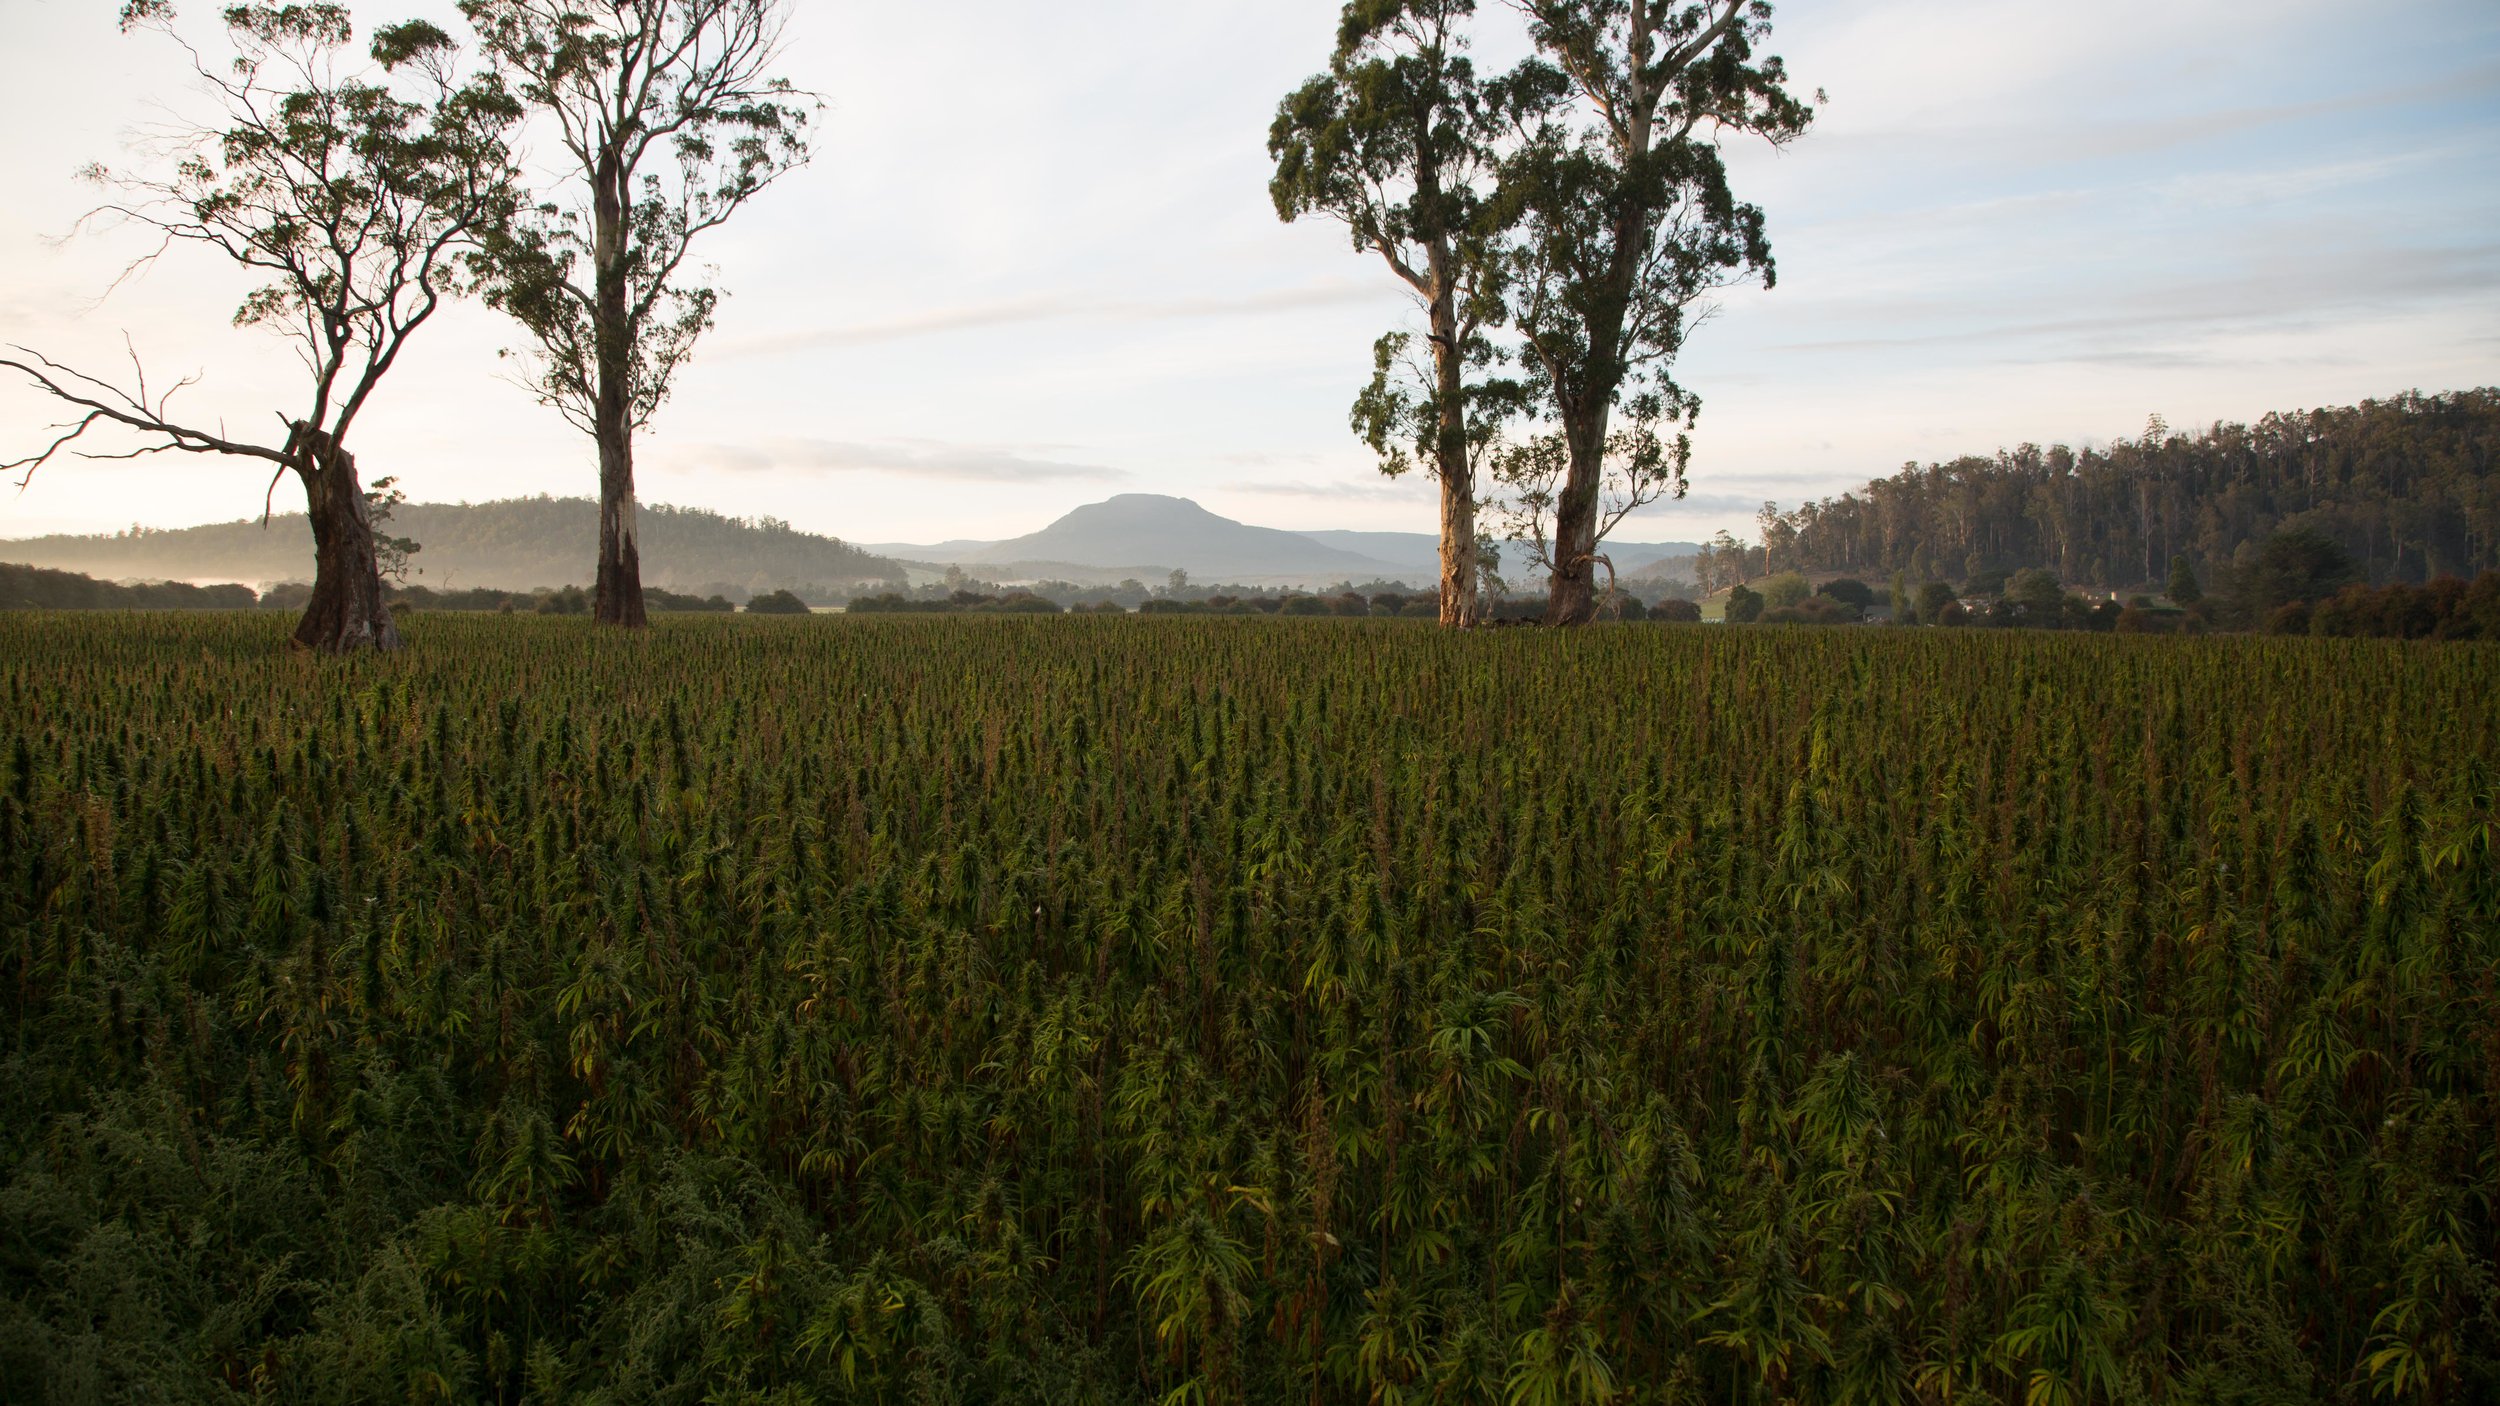  Each product can be traced back to the idyllic Tasmanian farmland where it was grown 